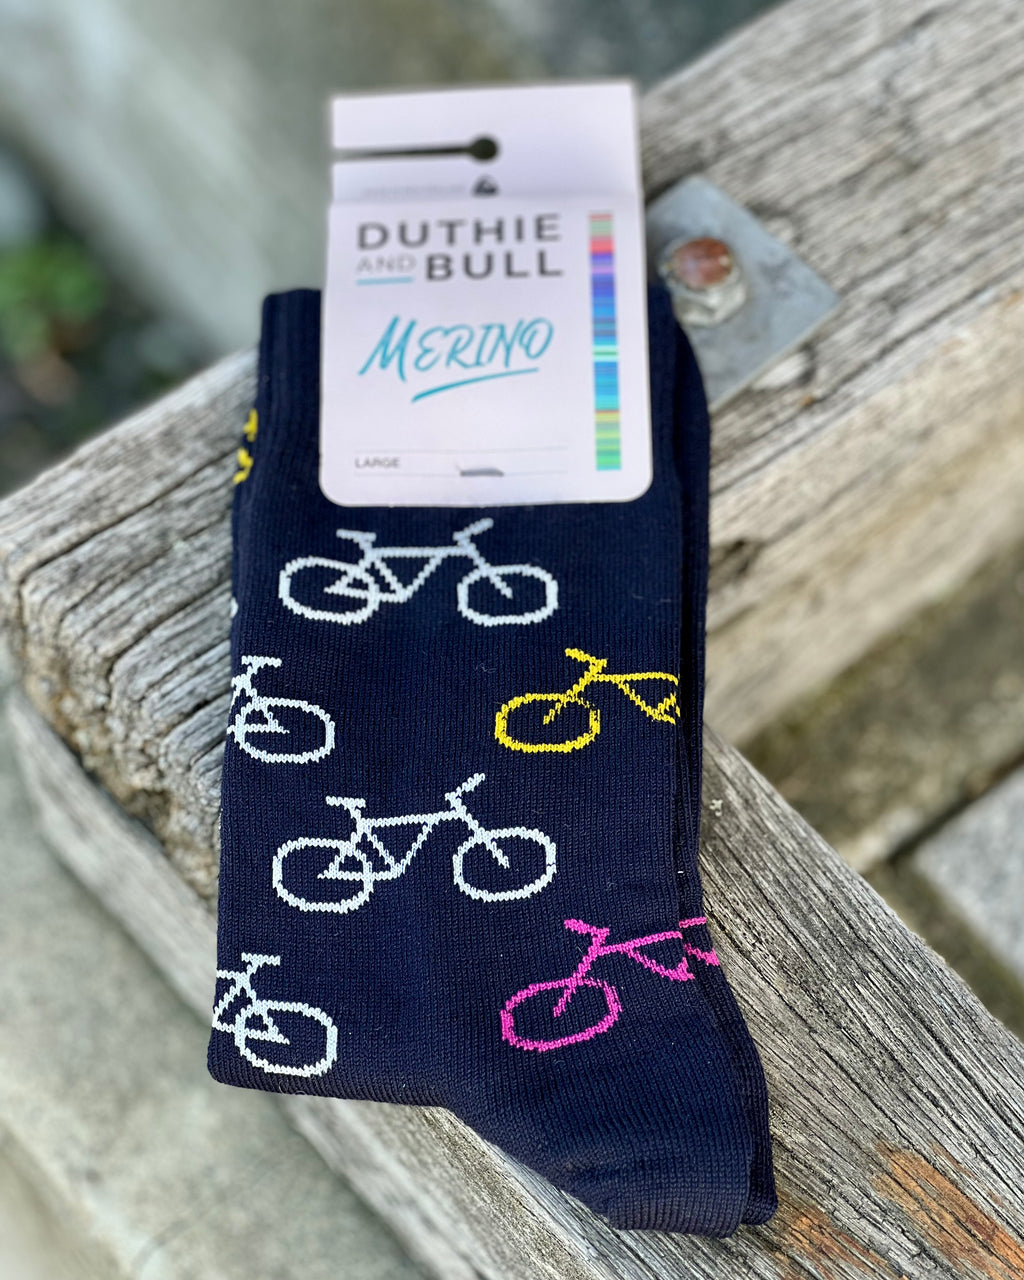 Merino mix mens socks with bicycle motif by Duthie and Bull